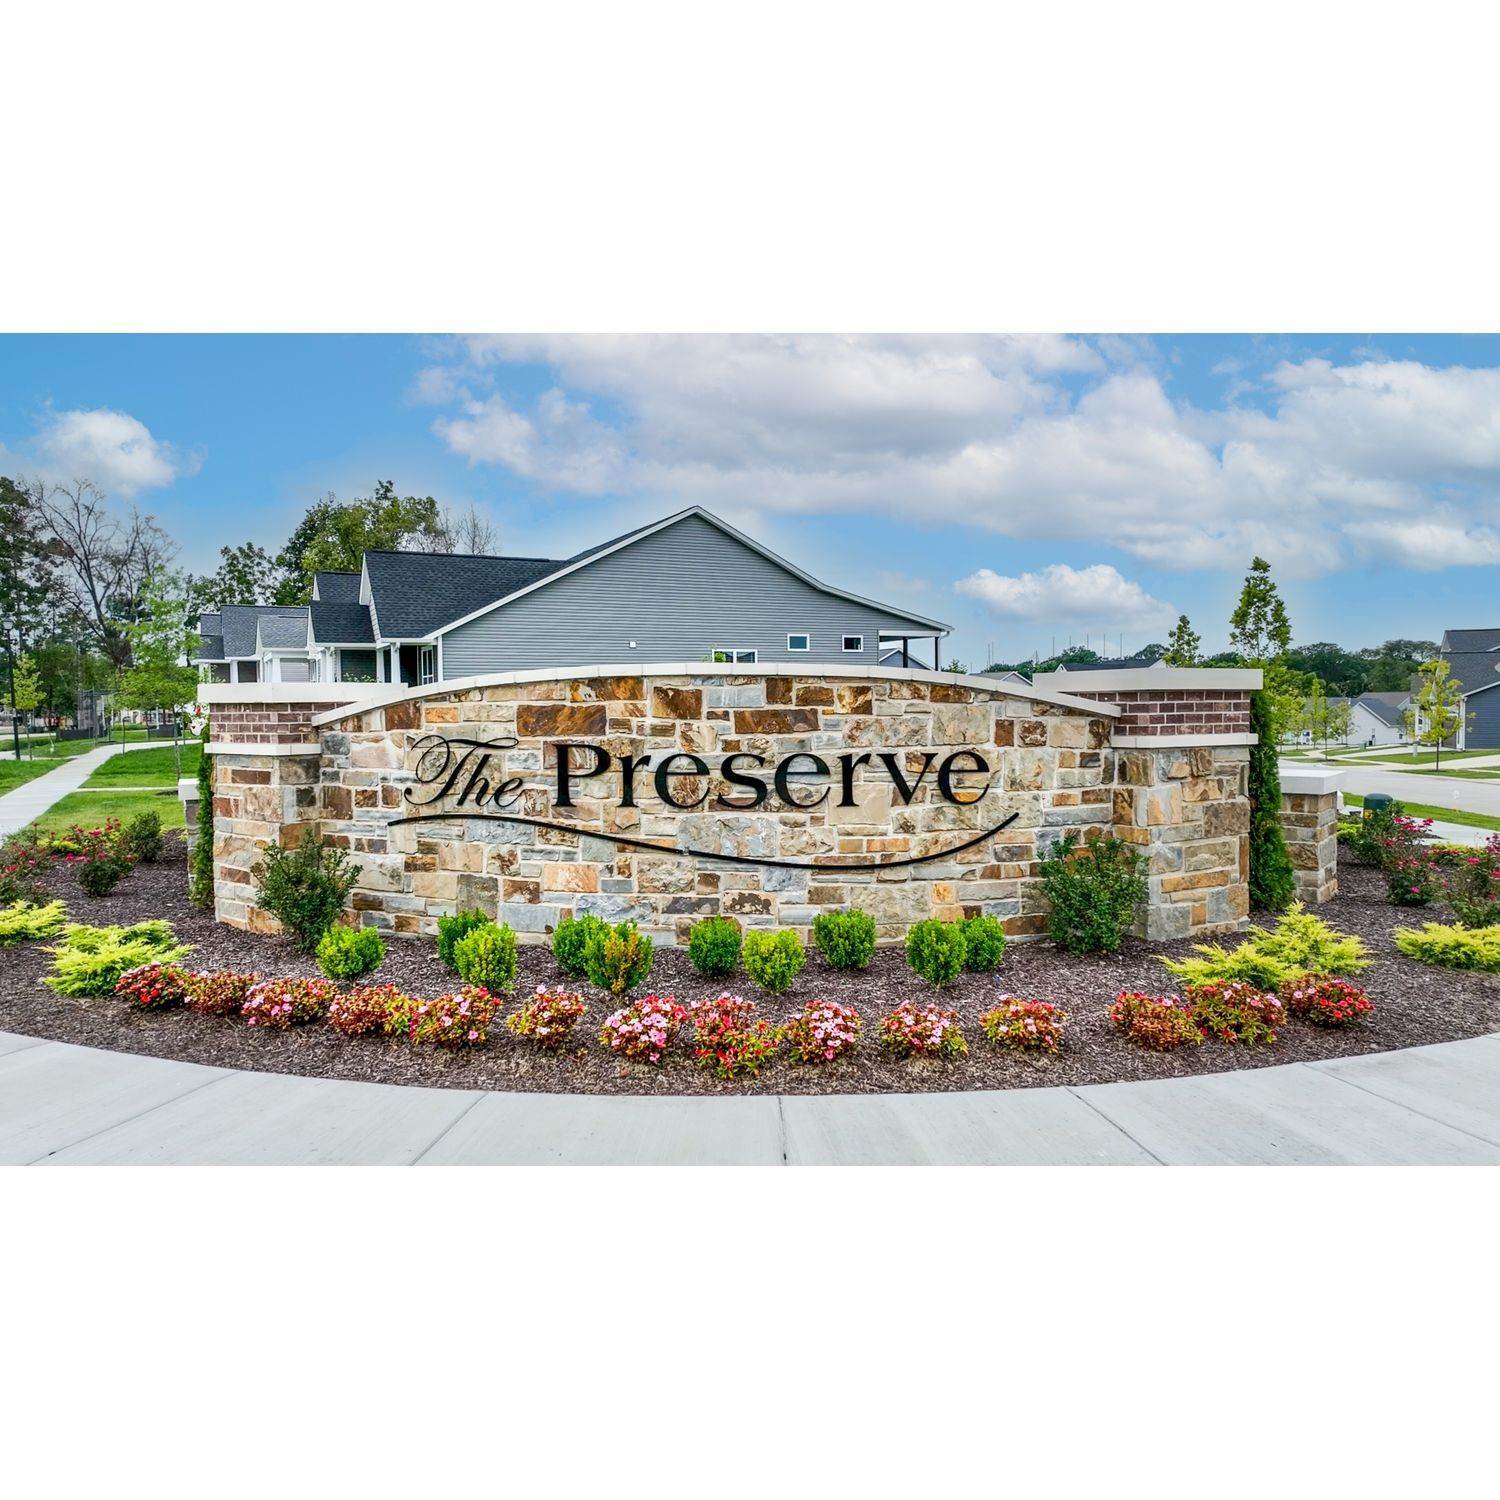 4. The Preserve Gebäude bei 6704 Preservation Parkway, St. Louis, MO 63123